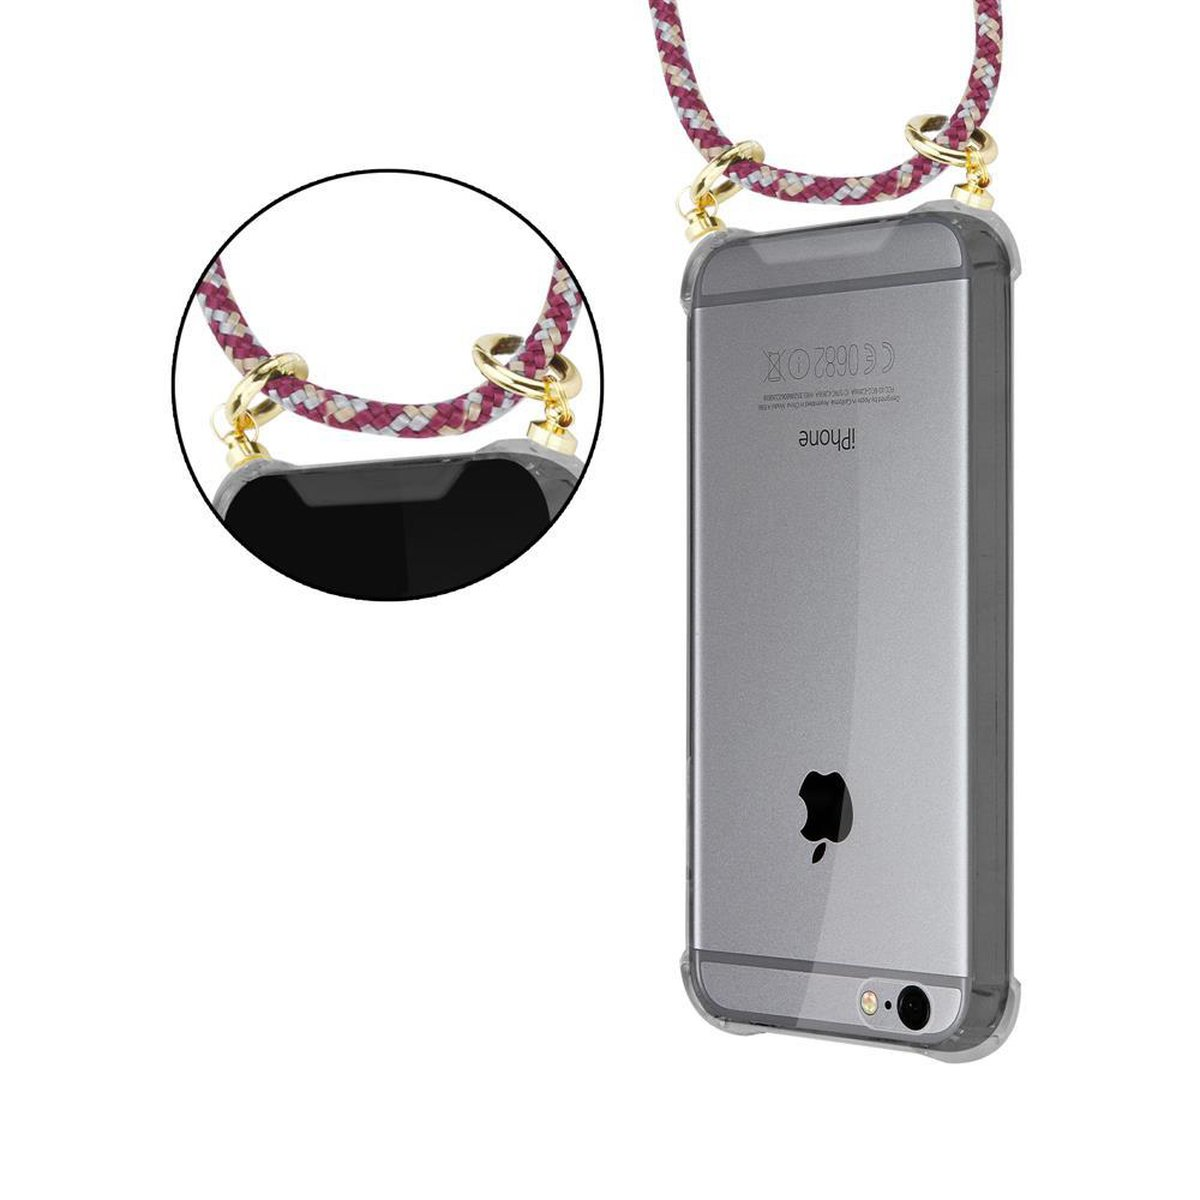 Apple, iPhone 6 Kette Band Kordel mit PLUS, CADORABO Hülle, PLUS abnehmbarer und / ROT Ringen, GELB 6S Backcover, WEIß Handy Gold